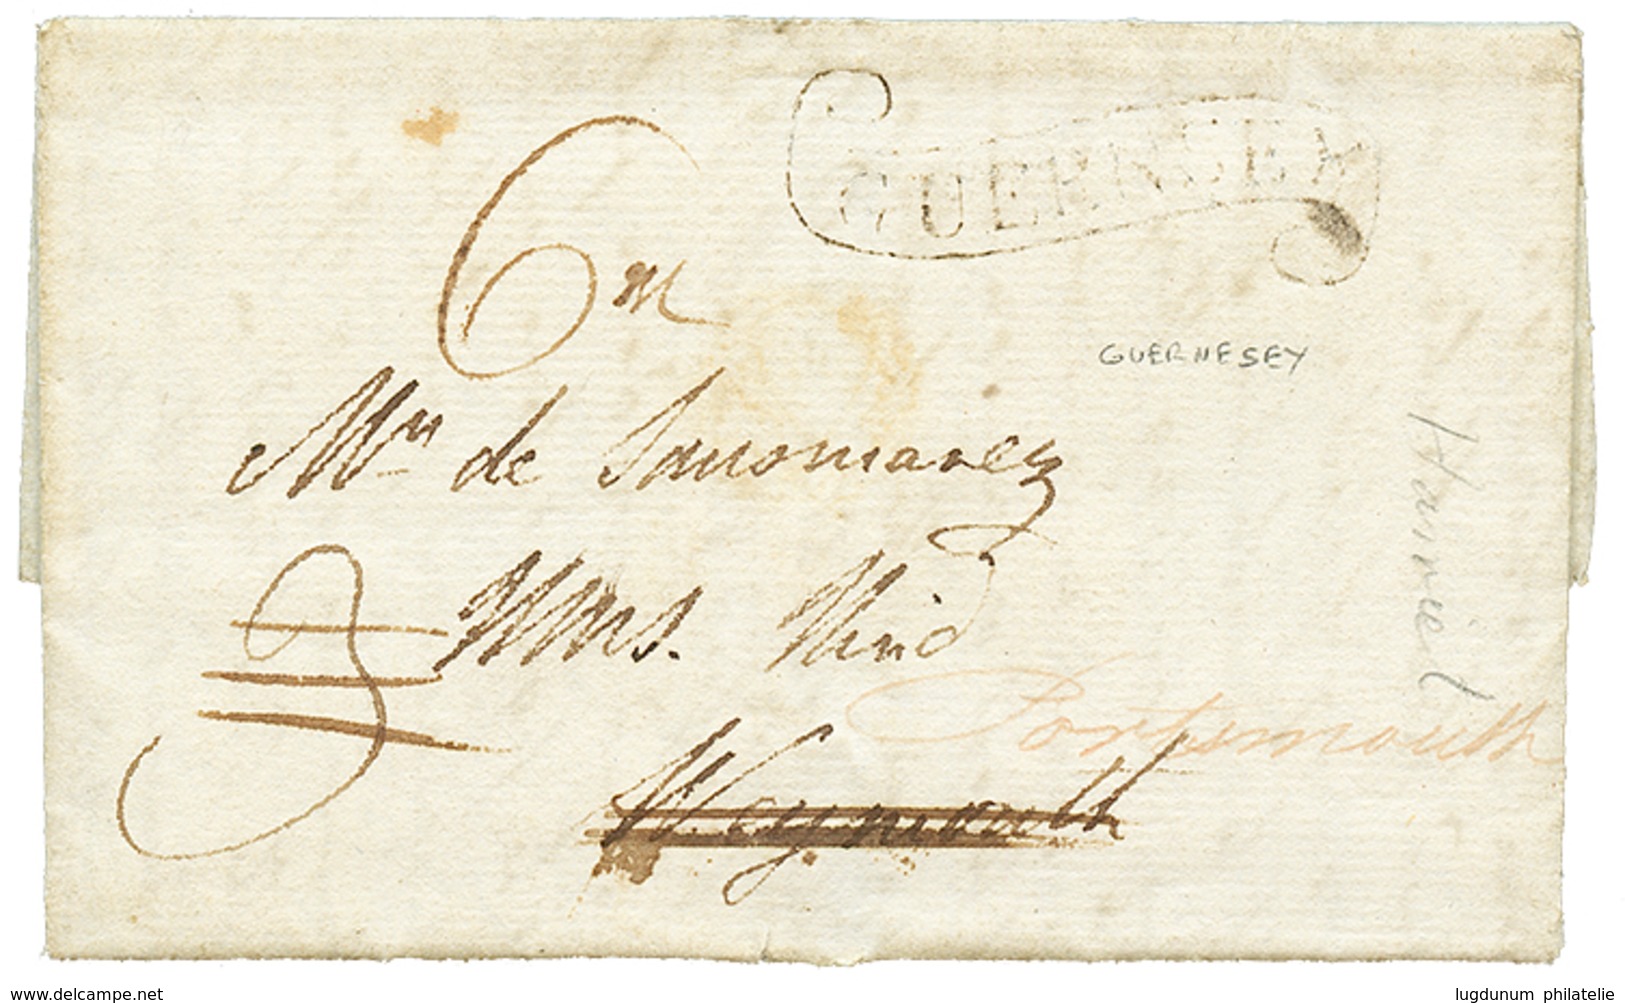 554 1820 Scroll GUERNESEY On Entire Letter From GUERNESEY To "H.M.S HIND" WEYMOUTH. Vf. - Guernsey